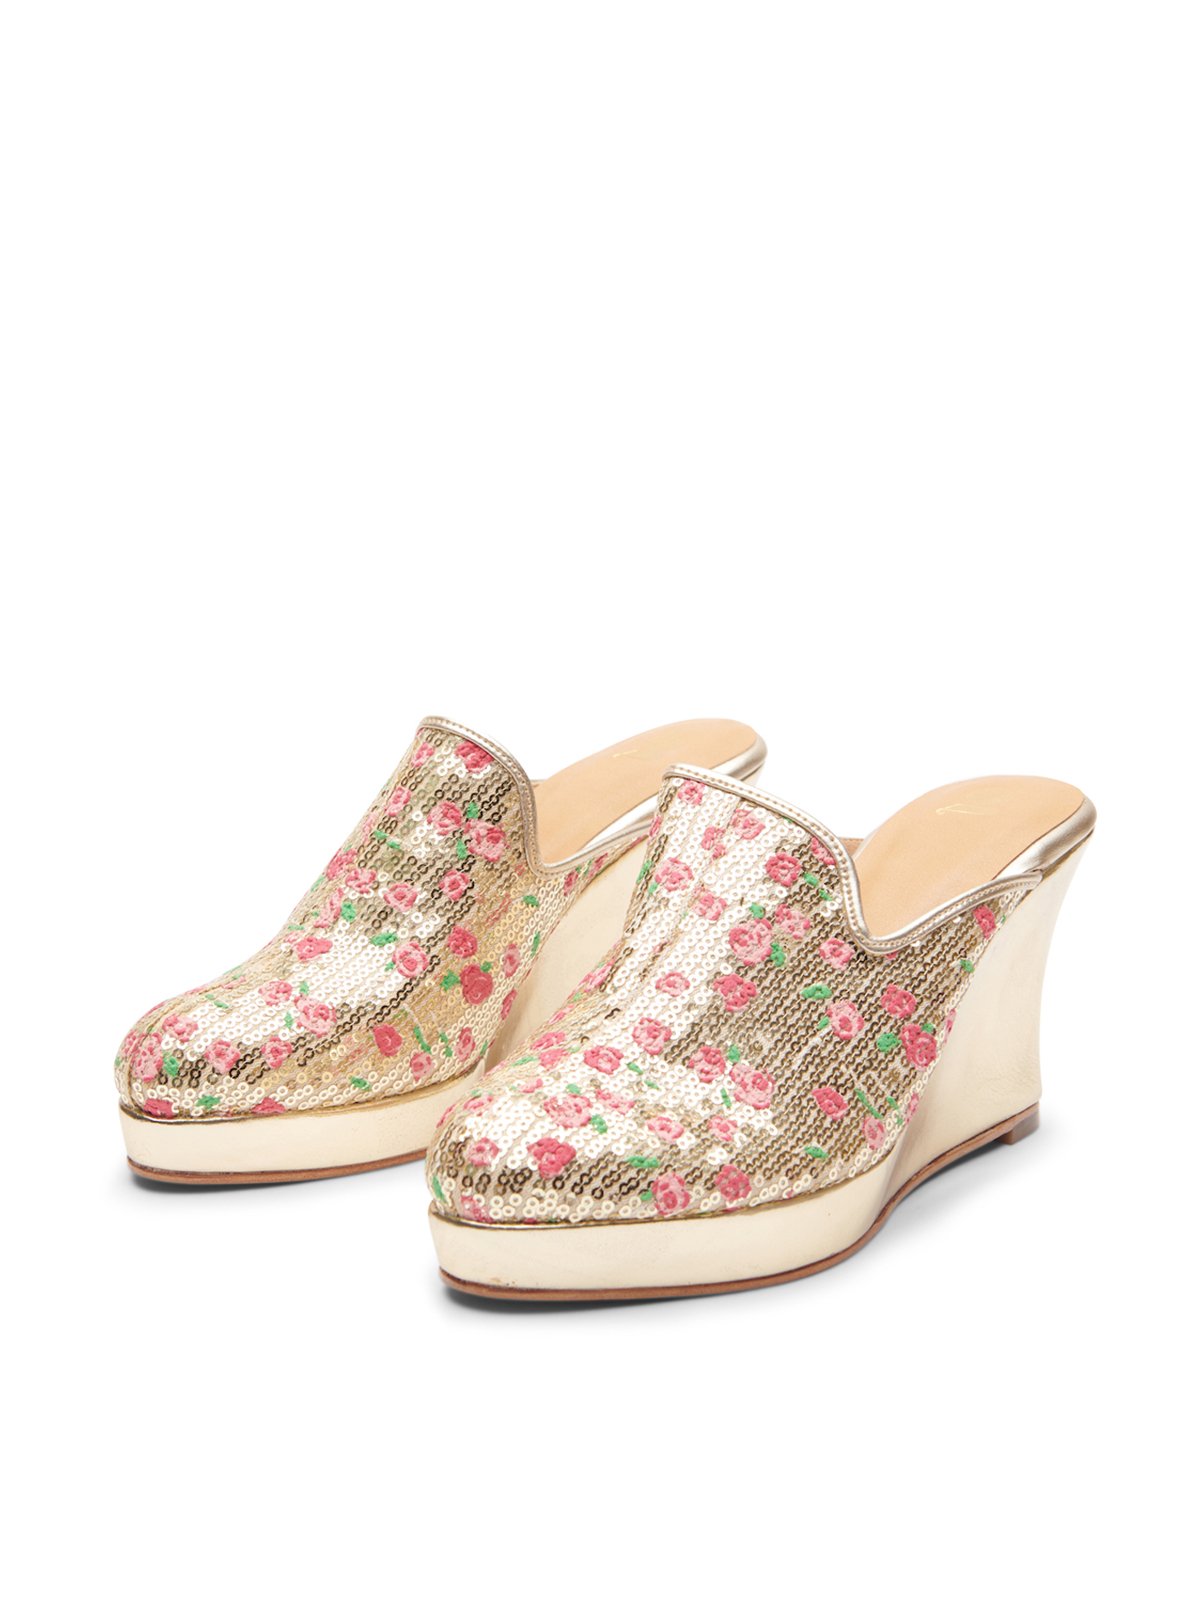 Floral Sequinned Babouche Platforms